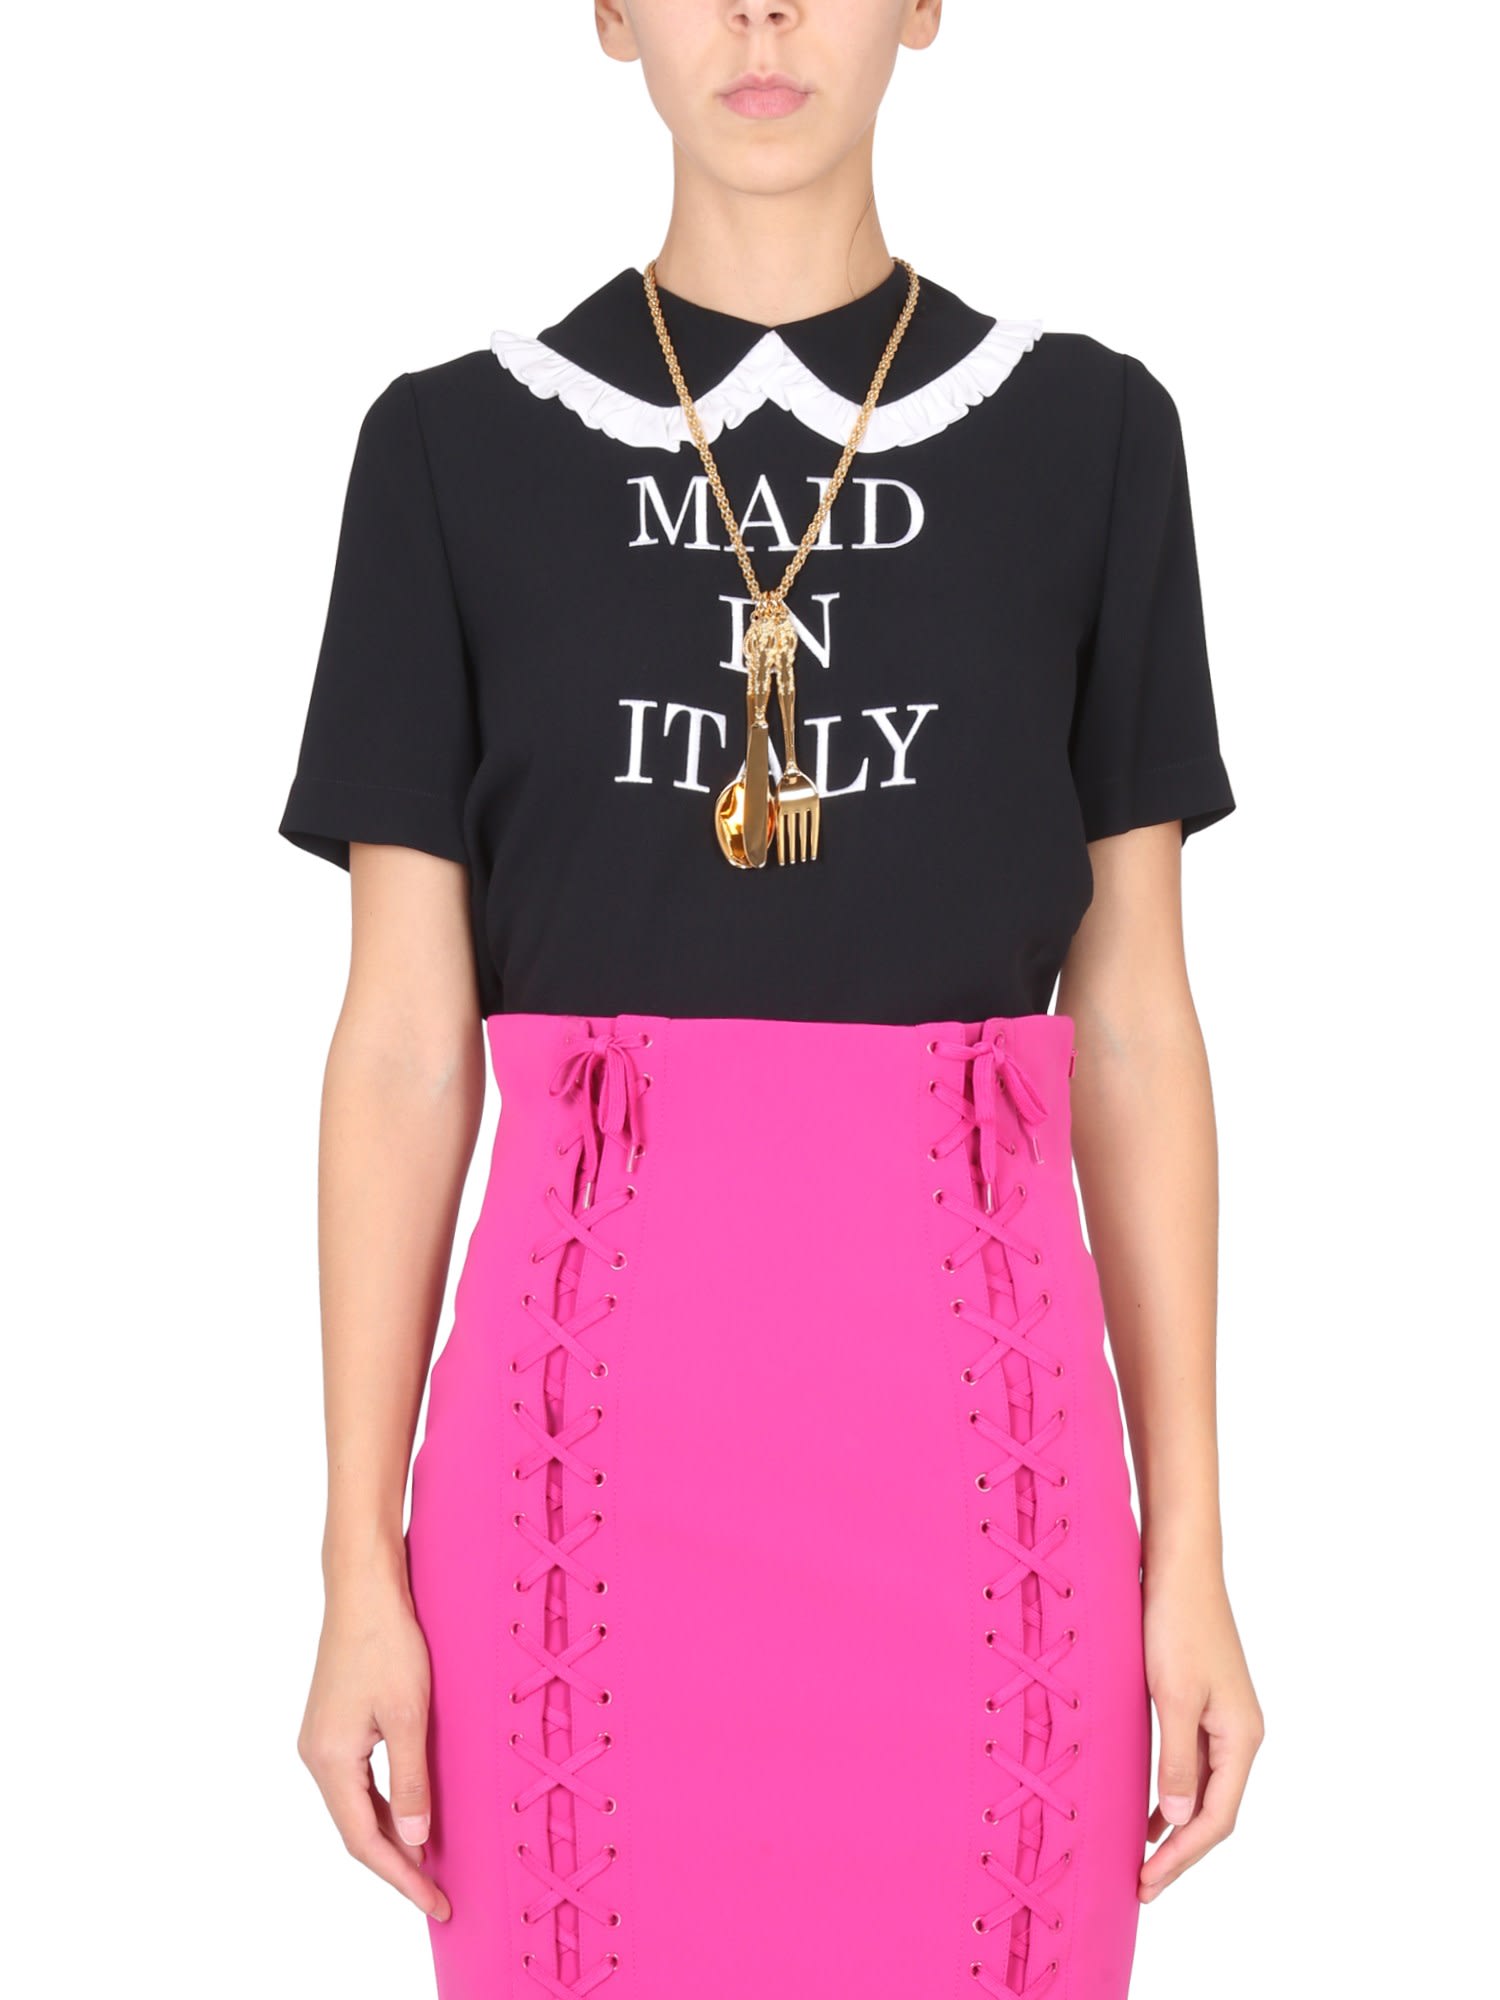 Moschino Maid In In Italy T-shirt